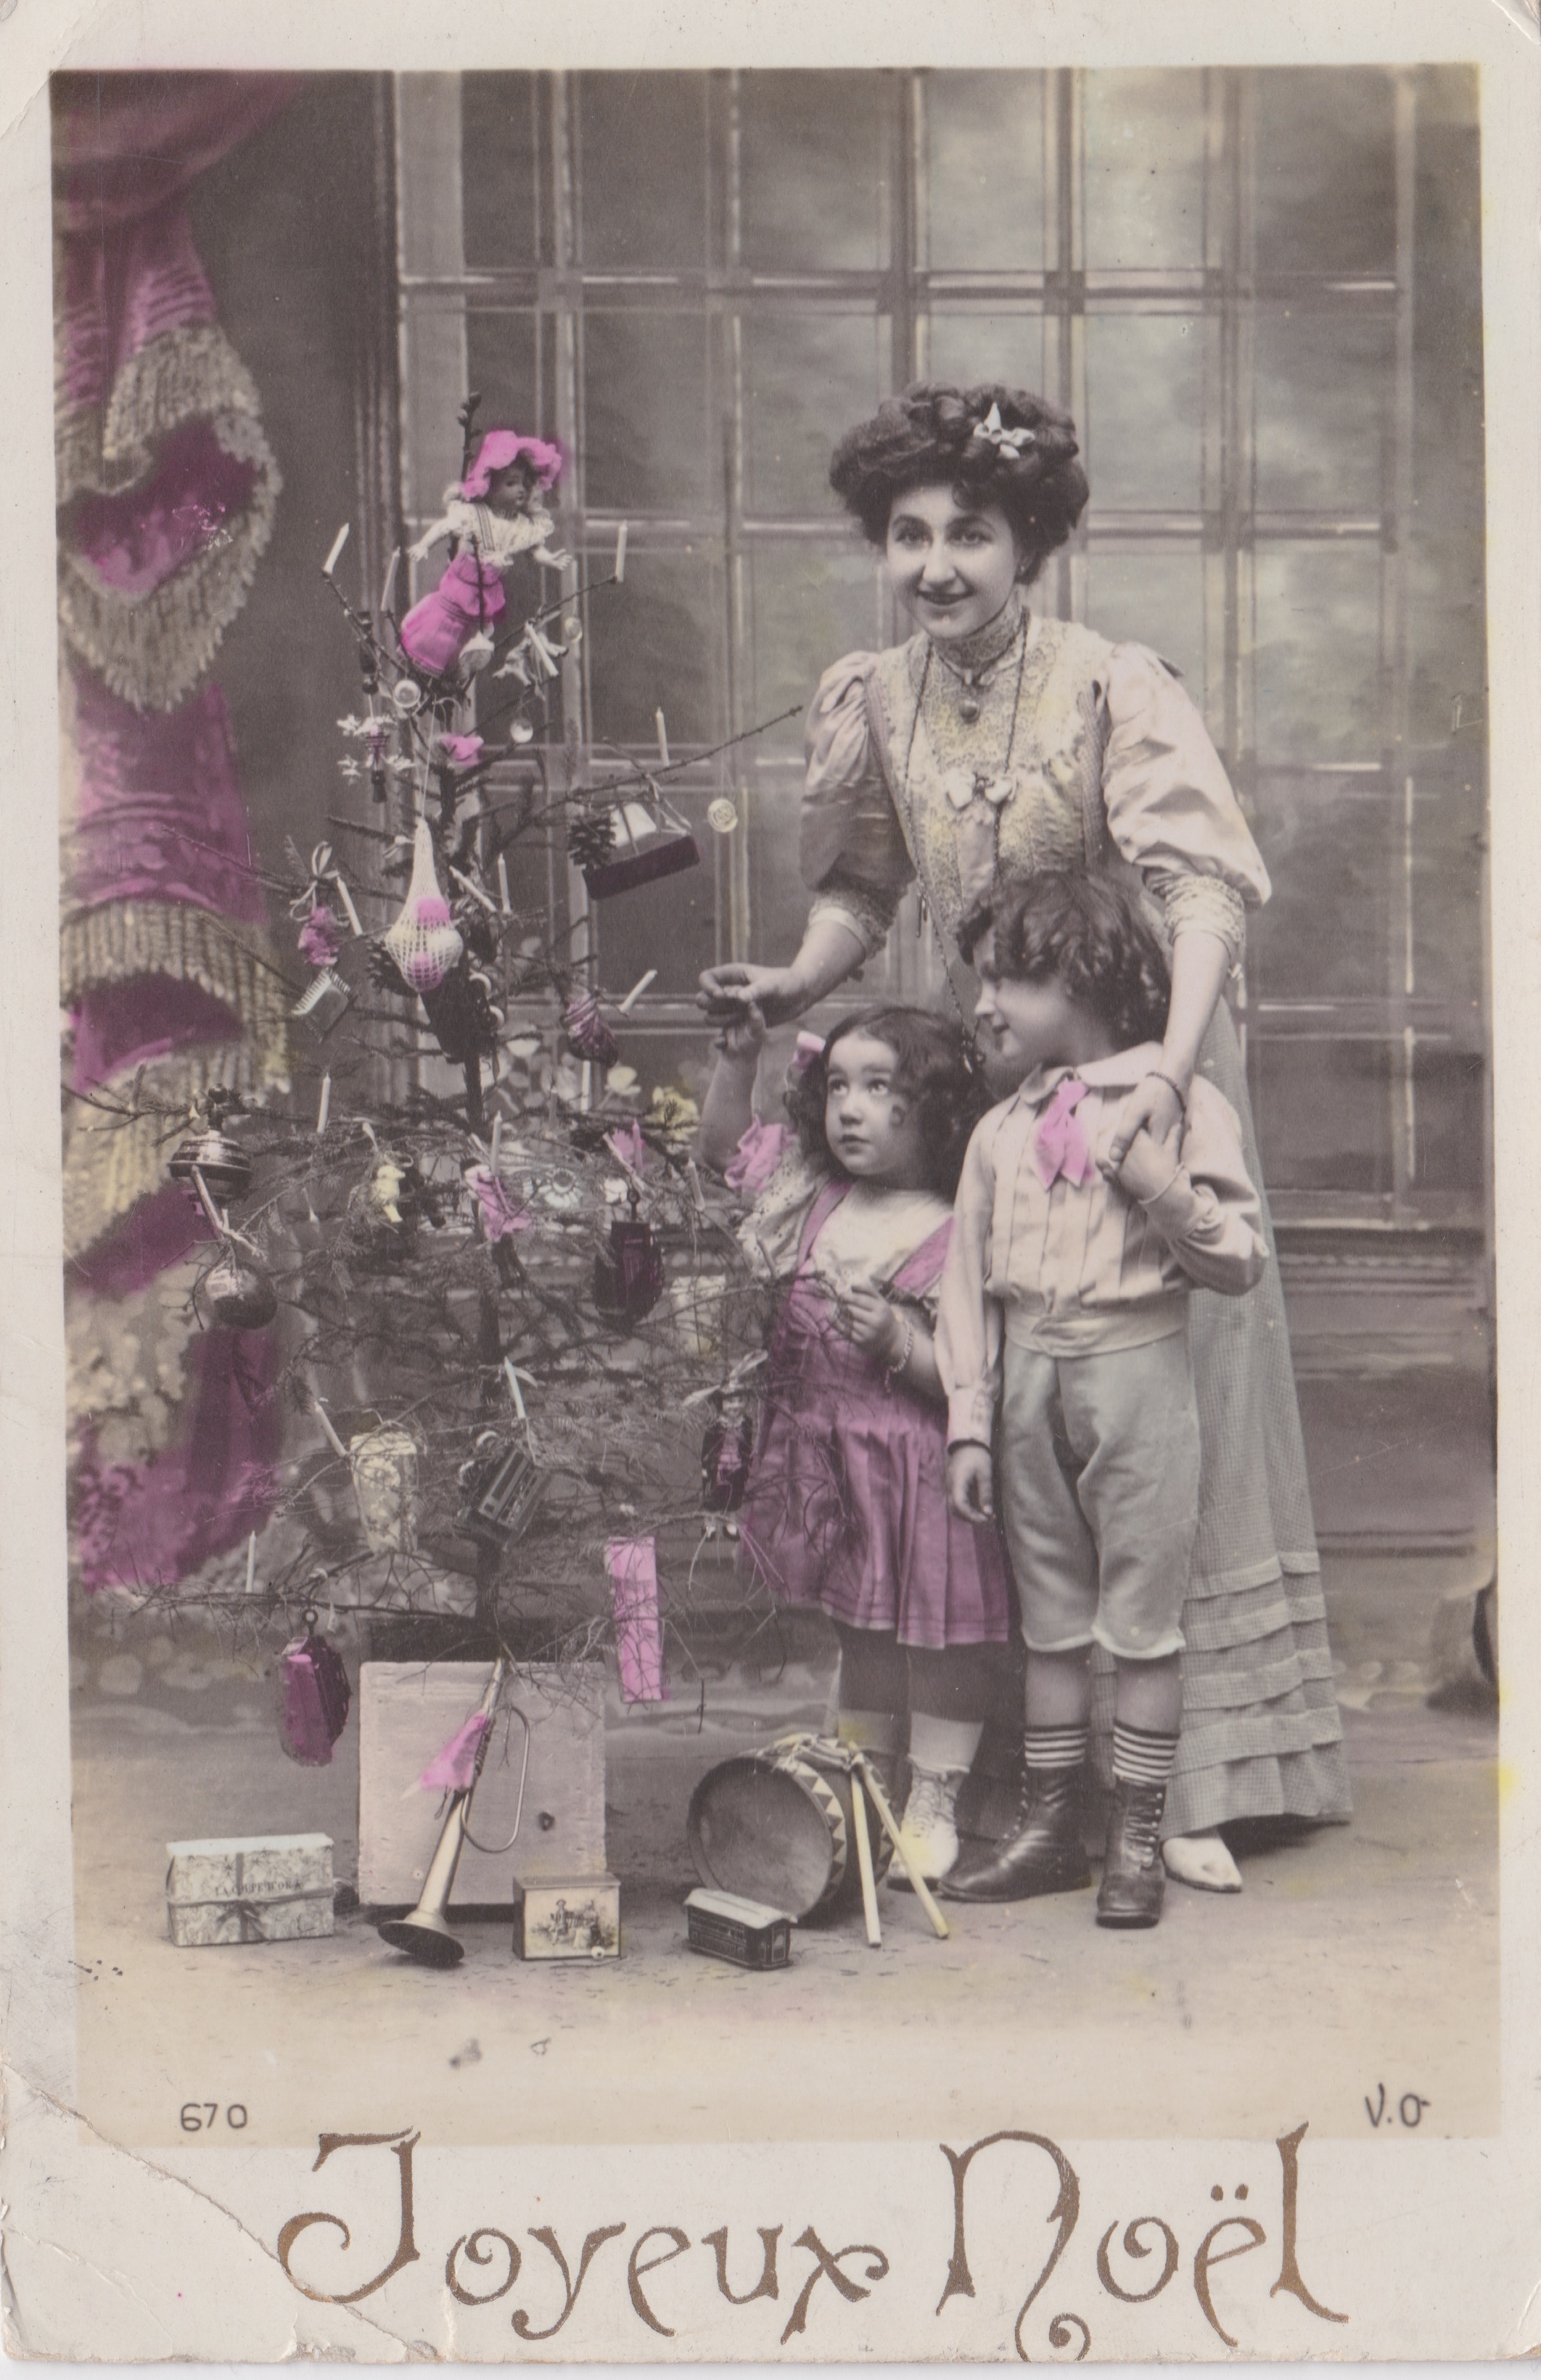 Carte Postale Dec 22 date unknown to Miss Watts Reddrum Cottage Surrey 'To Phoebe with love &amp; good wishes'